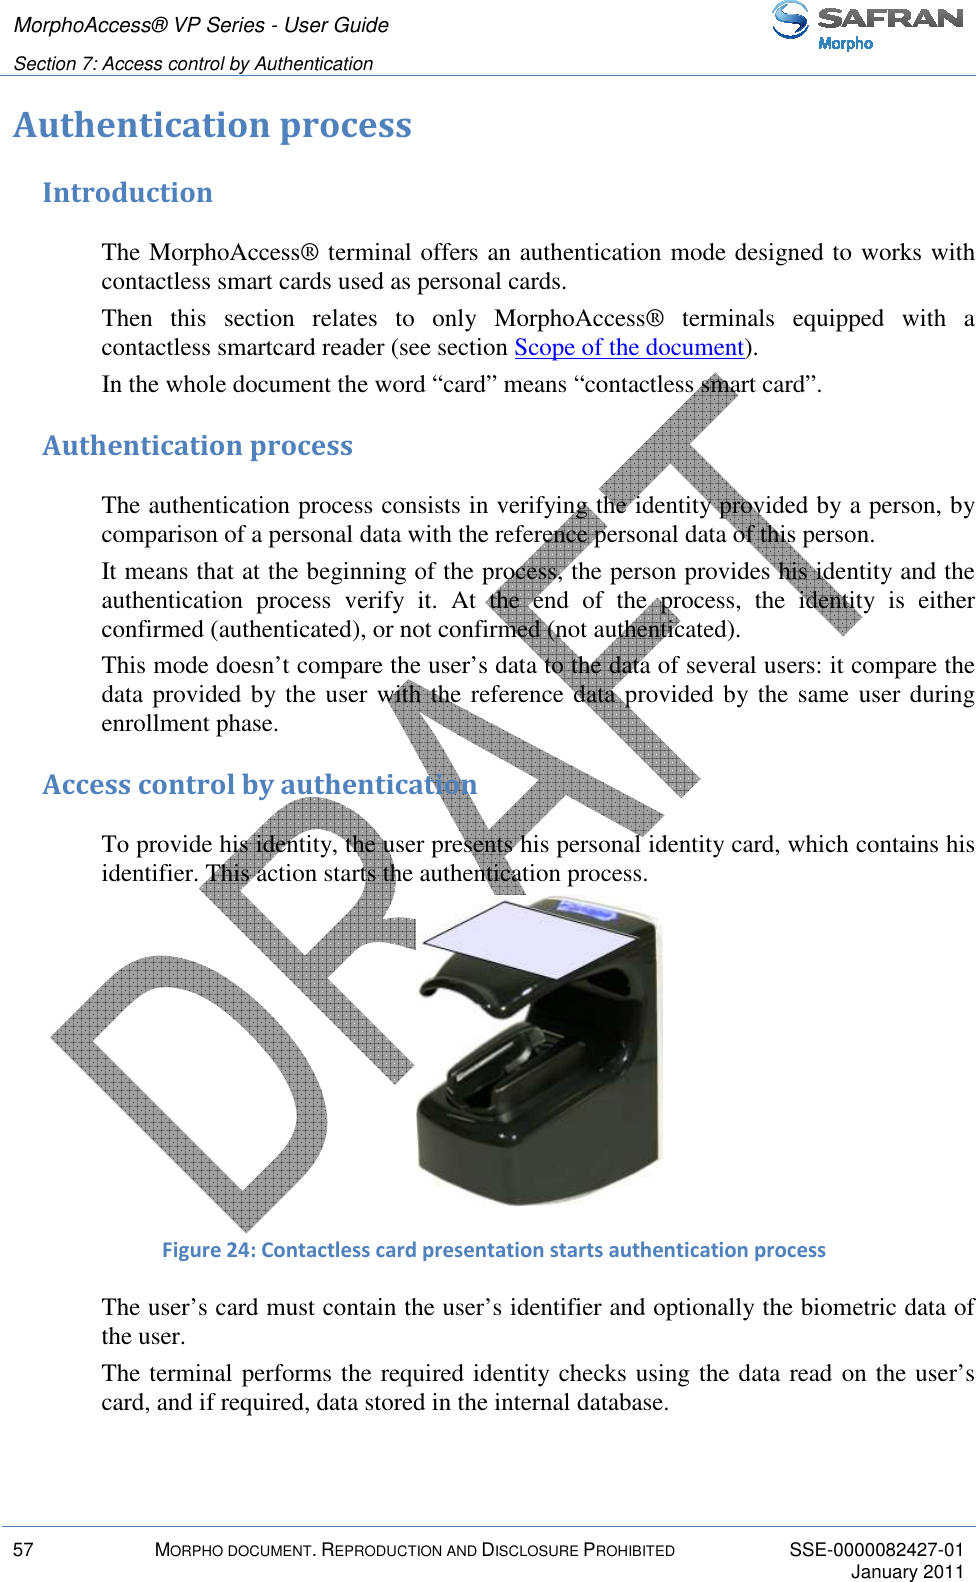 MorphoAccess® VP Series - User Guide   Section 7: Access control by Authentication         57  MORPHO DOCUMENT. REPRODUCTION AND DISCLOSURE PROHIBITED  SSE-0000082427-01     January 2011  Authentication process Introduction The MorphoAccess® terminal offers an authentication mode designed to works with contactless smart cards used as personal cards. Then  this  section  relates  to  only  MorphoAccess®  terminals  equipped  with  a contactless smartcard reader (see section Scope of the document). In the whole document the word “card” means “contactless smart card”. Authentication process The authentication process consists in verifying the identity provided by a person, by comparison of a personal data with the reference personal data of this person. It means that at the beginning of the process, the person provides his identity and the authentication  process  verify  it.  At  the  end  of  the  process,  the  identity  is  either confirmed (authenticated), or not confirmed (not authenticated). This mode doesn’t compare the user’s data to the data of several users: it compare the data provided by the user with the reference data provided by the same user during enrollment phase. Access control by authentication To provide his identity, the user presents his personal identity card, which contains his identifier. This action starts the authentication process.  Figure 24: Contactless card presentation starts authentication process The user’s card must contain the user’s identifier and optionally the biometric data of the user. The terminal performs the required identity checks using the data read on the user’s card, and if required, data stored in the internal database. 